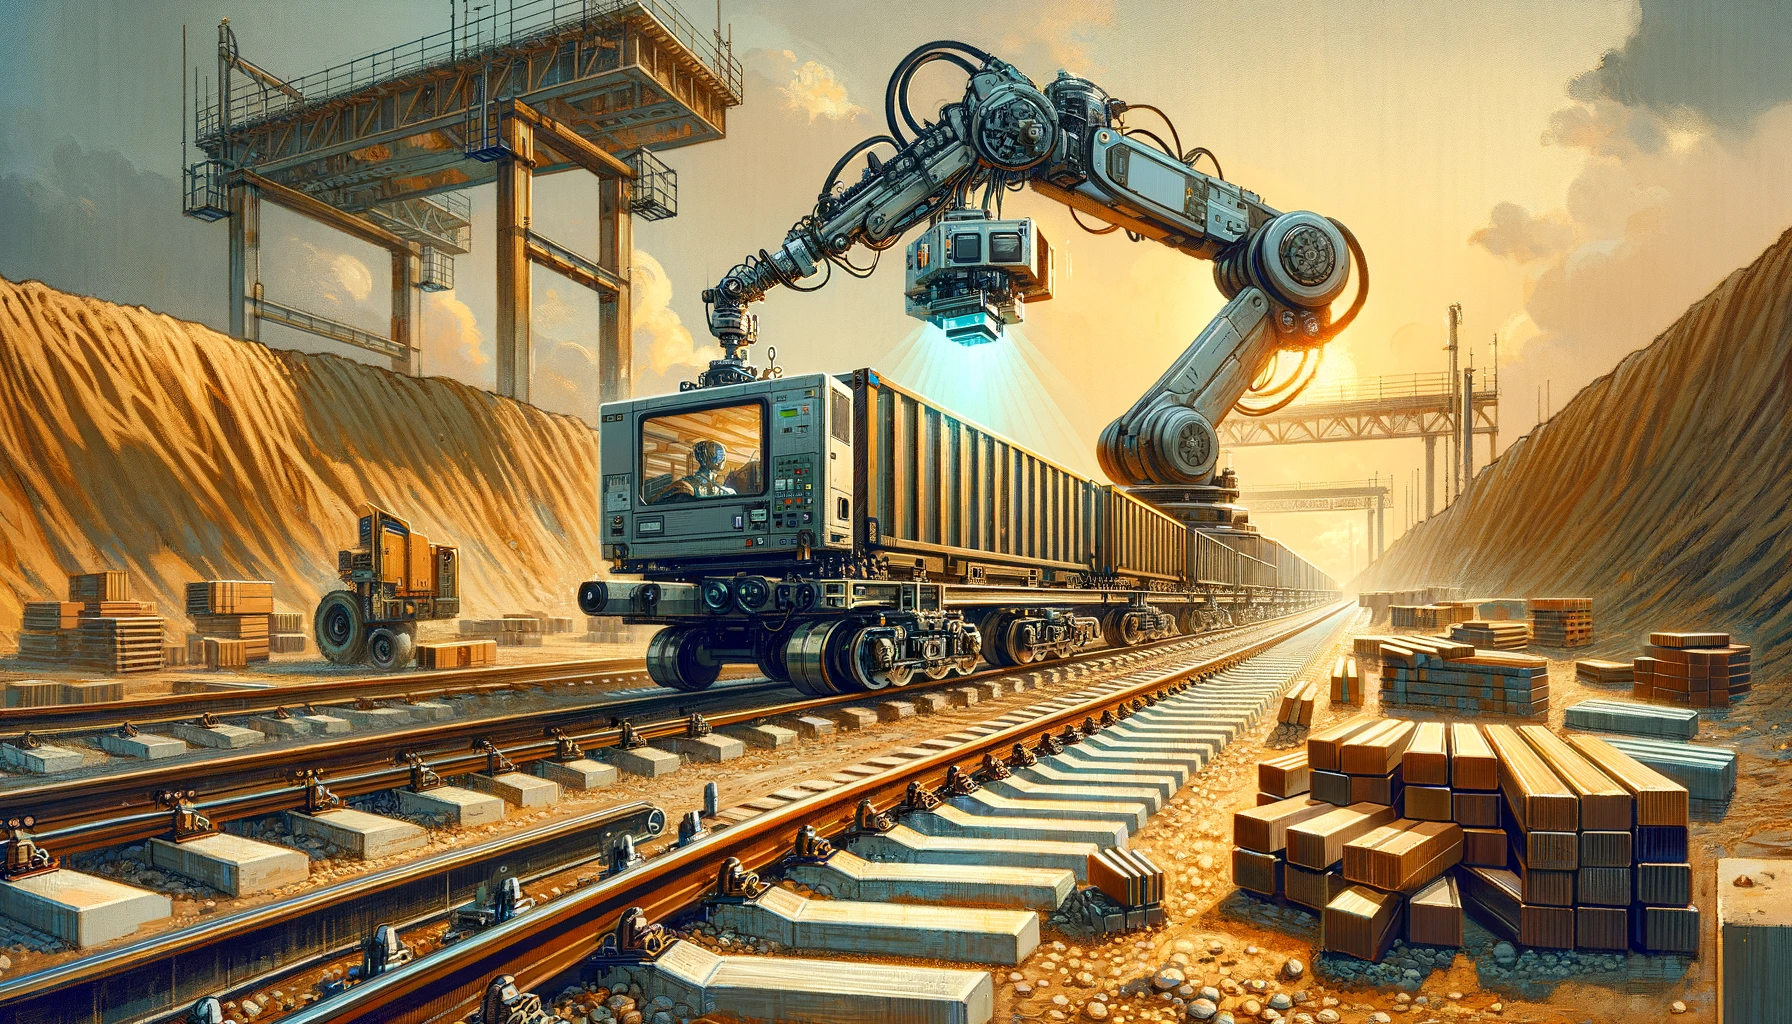 The illustration for the article on how machine vision technology supports railway operations by ensuring a steady supply of joint plates is ready, depicting the integration of advanced technology in railway construction.